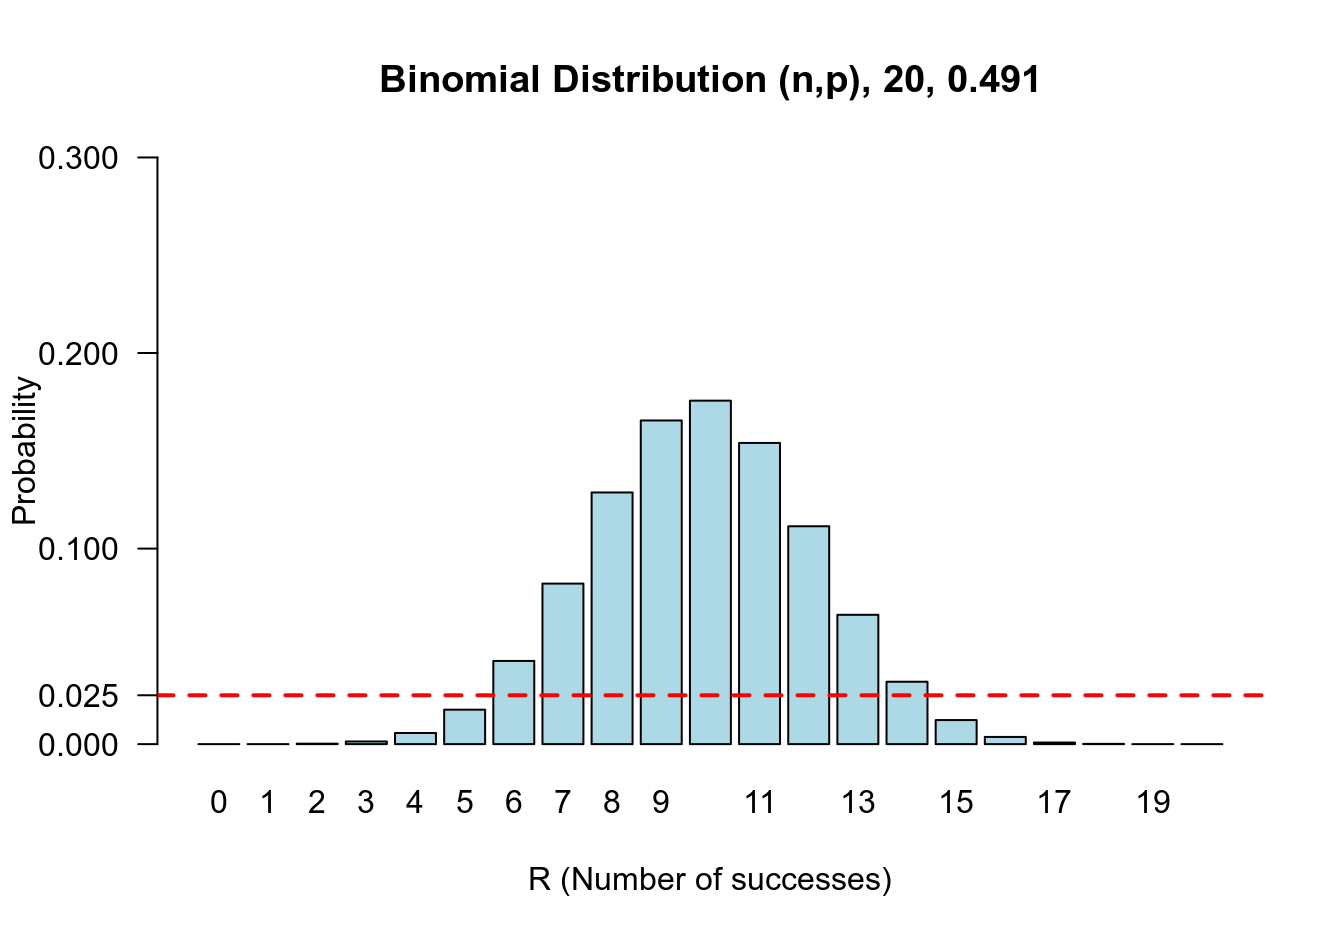 Sampling distribution of number of successes out of 20 (R) conditional on the probability of success being 0.4910